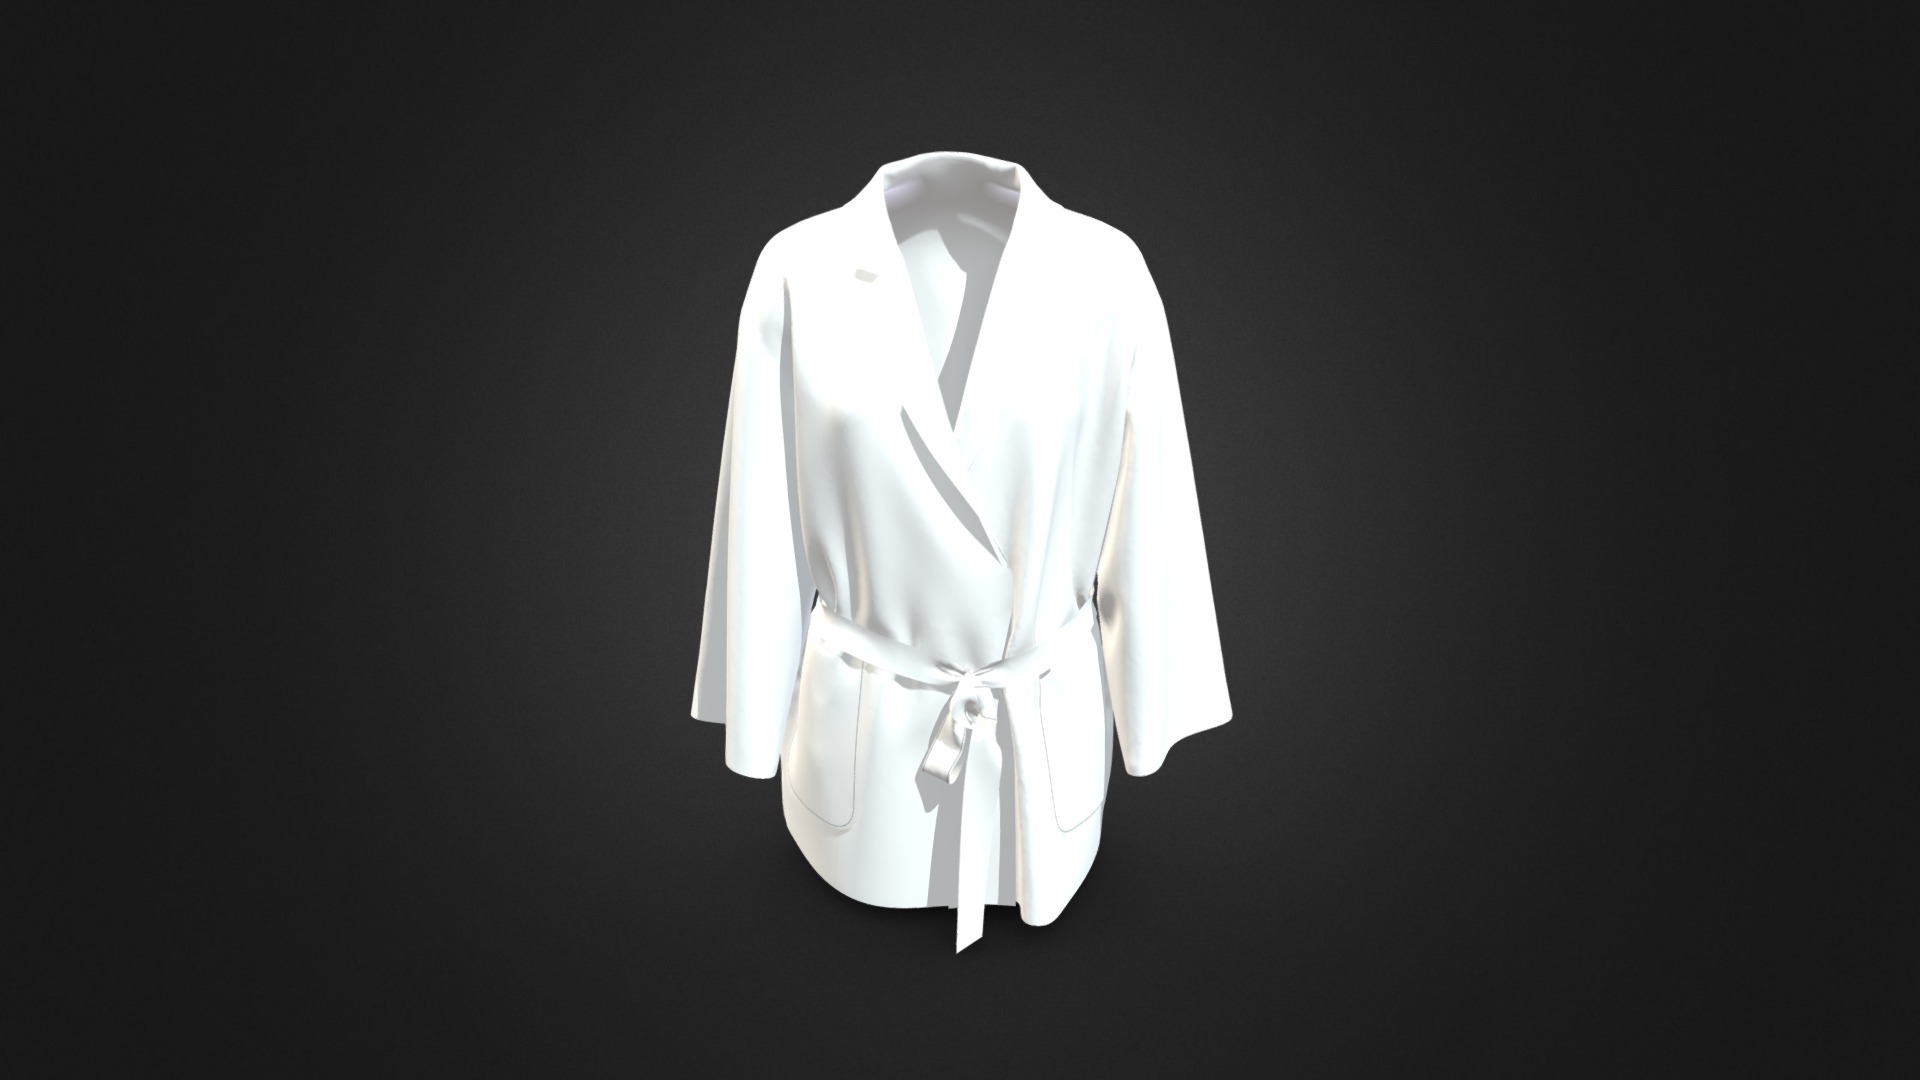 3D model belt jacket - This is a 3D model of the belt jacket. The 3D model is about a white shirt with a white bow.